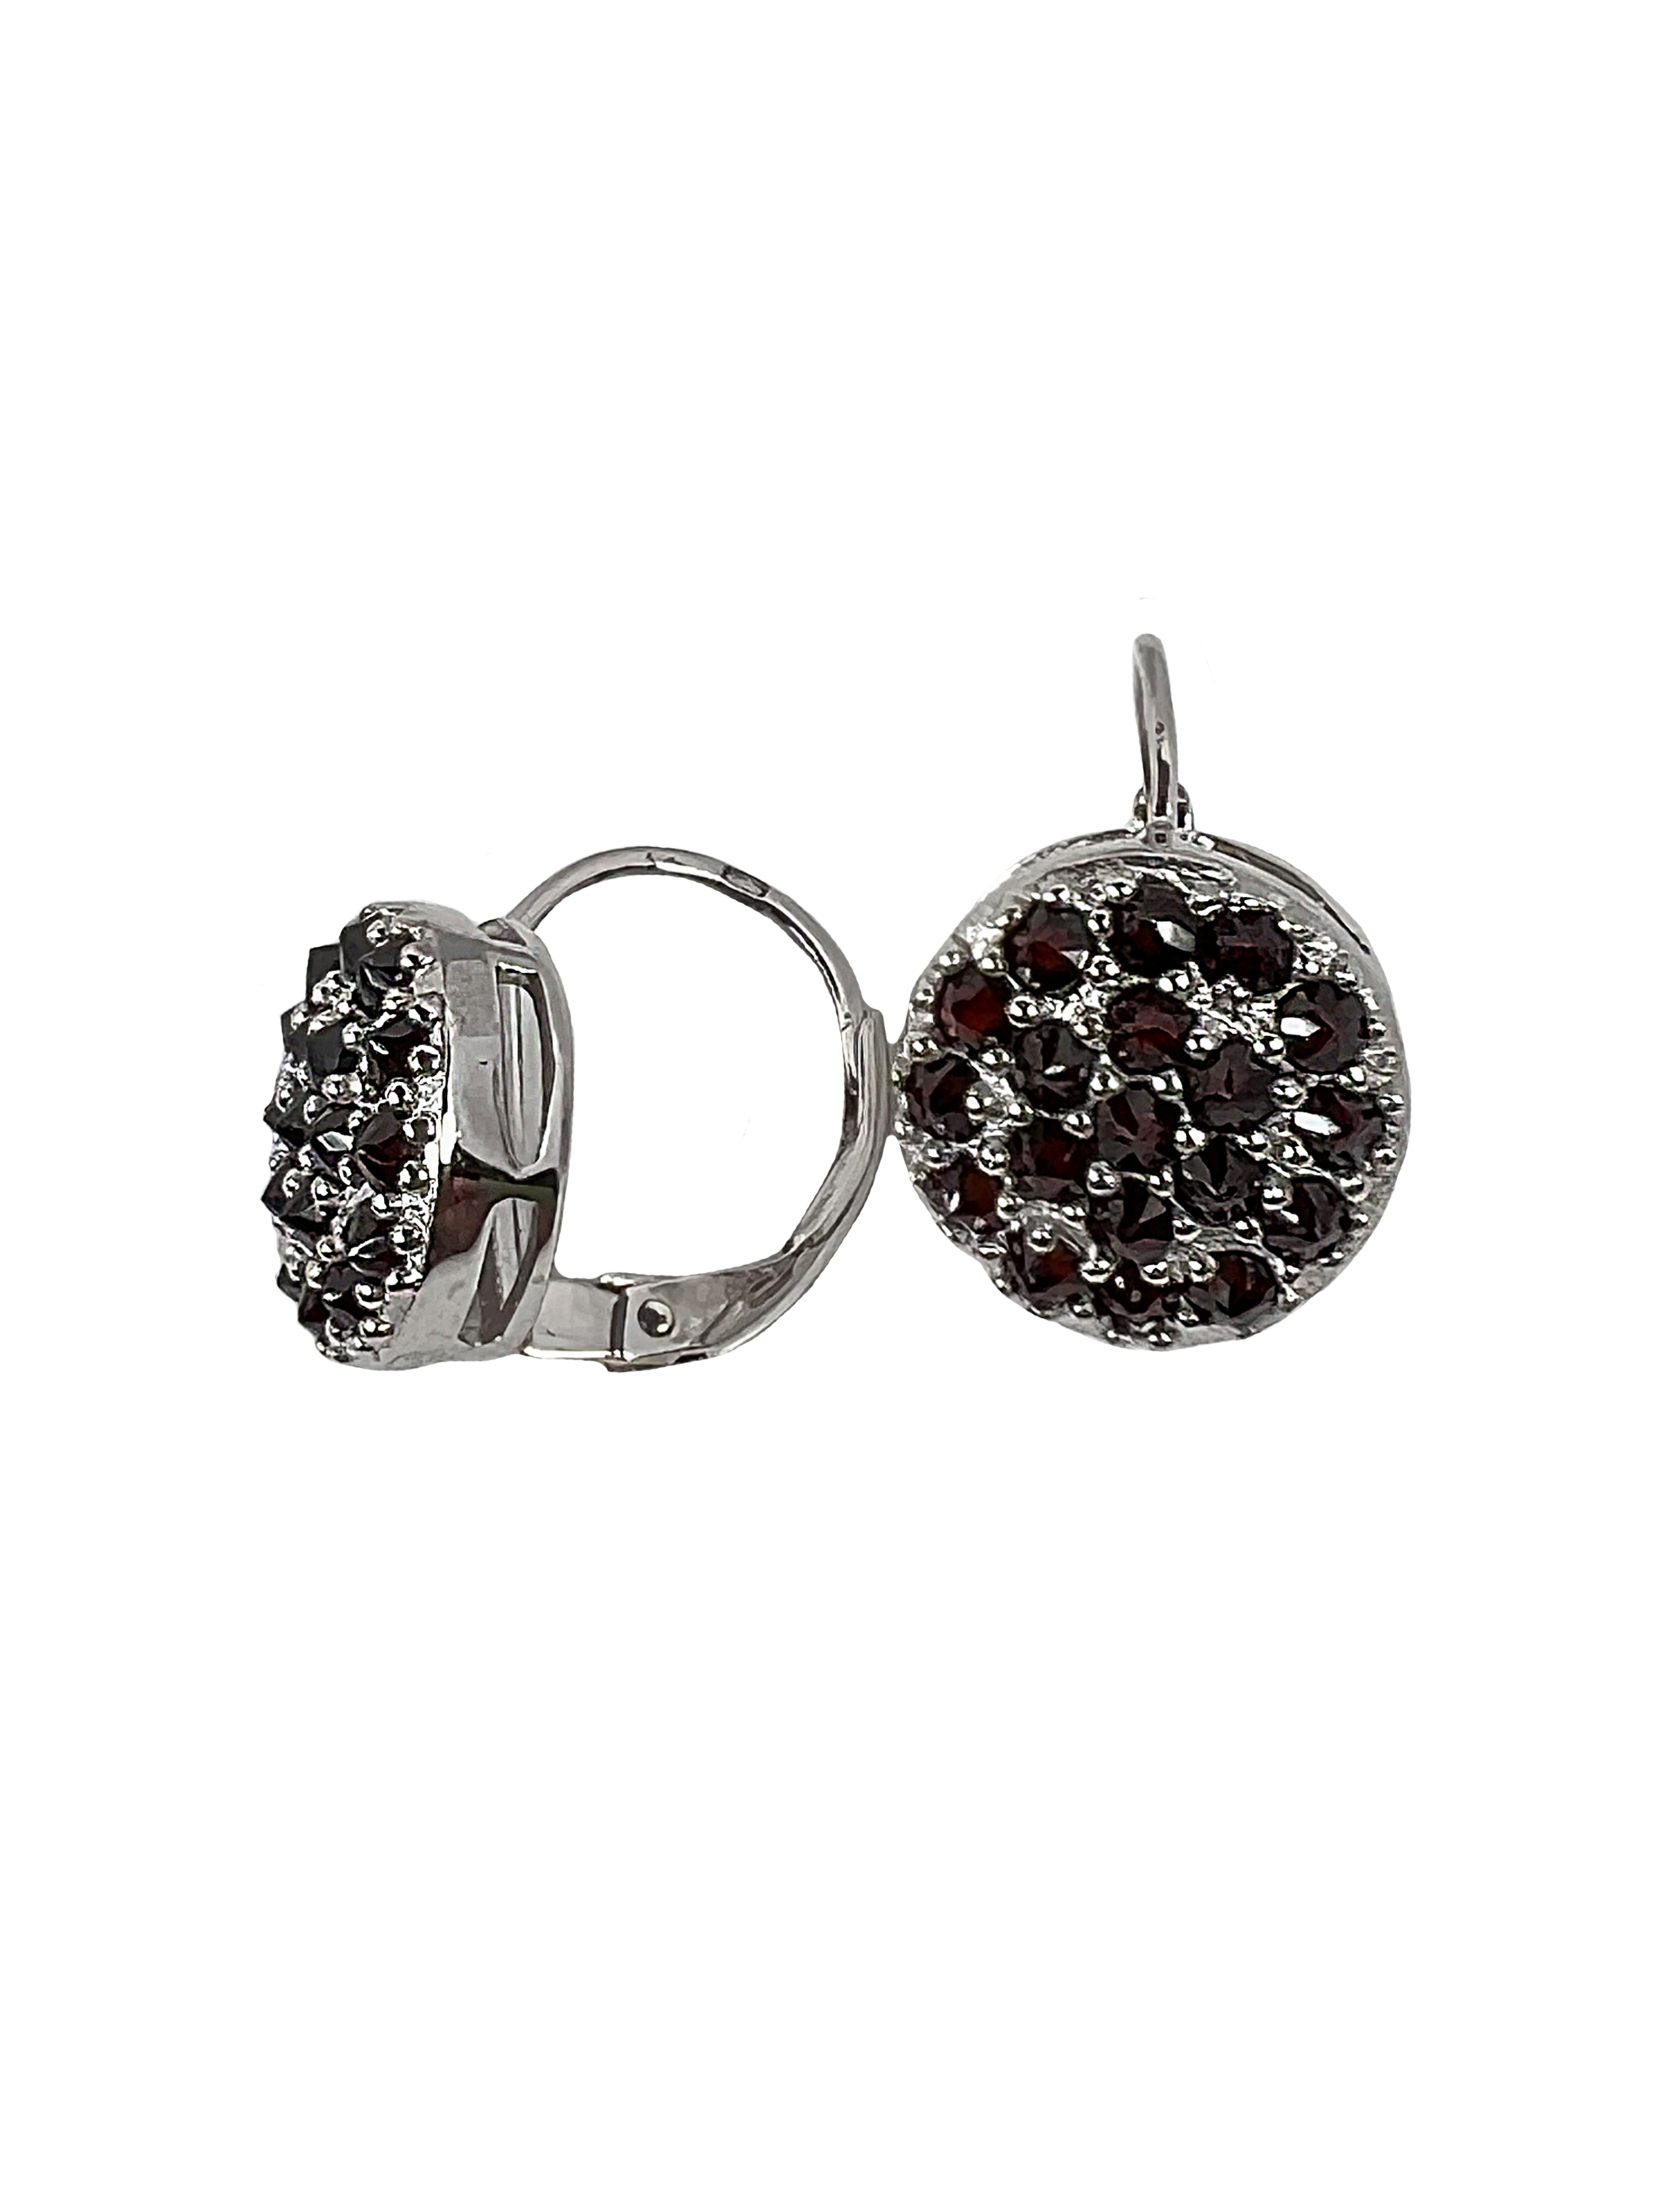 Silver earrings with garnets and crystals